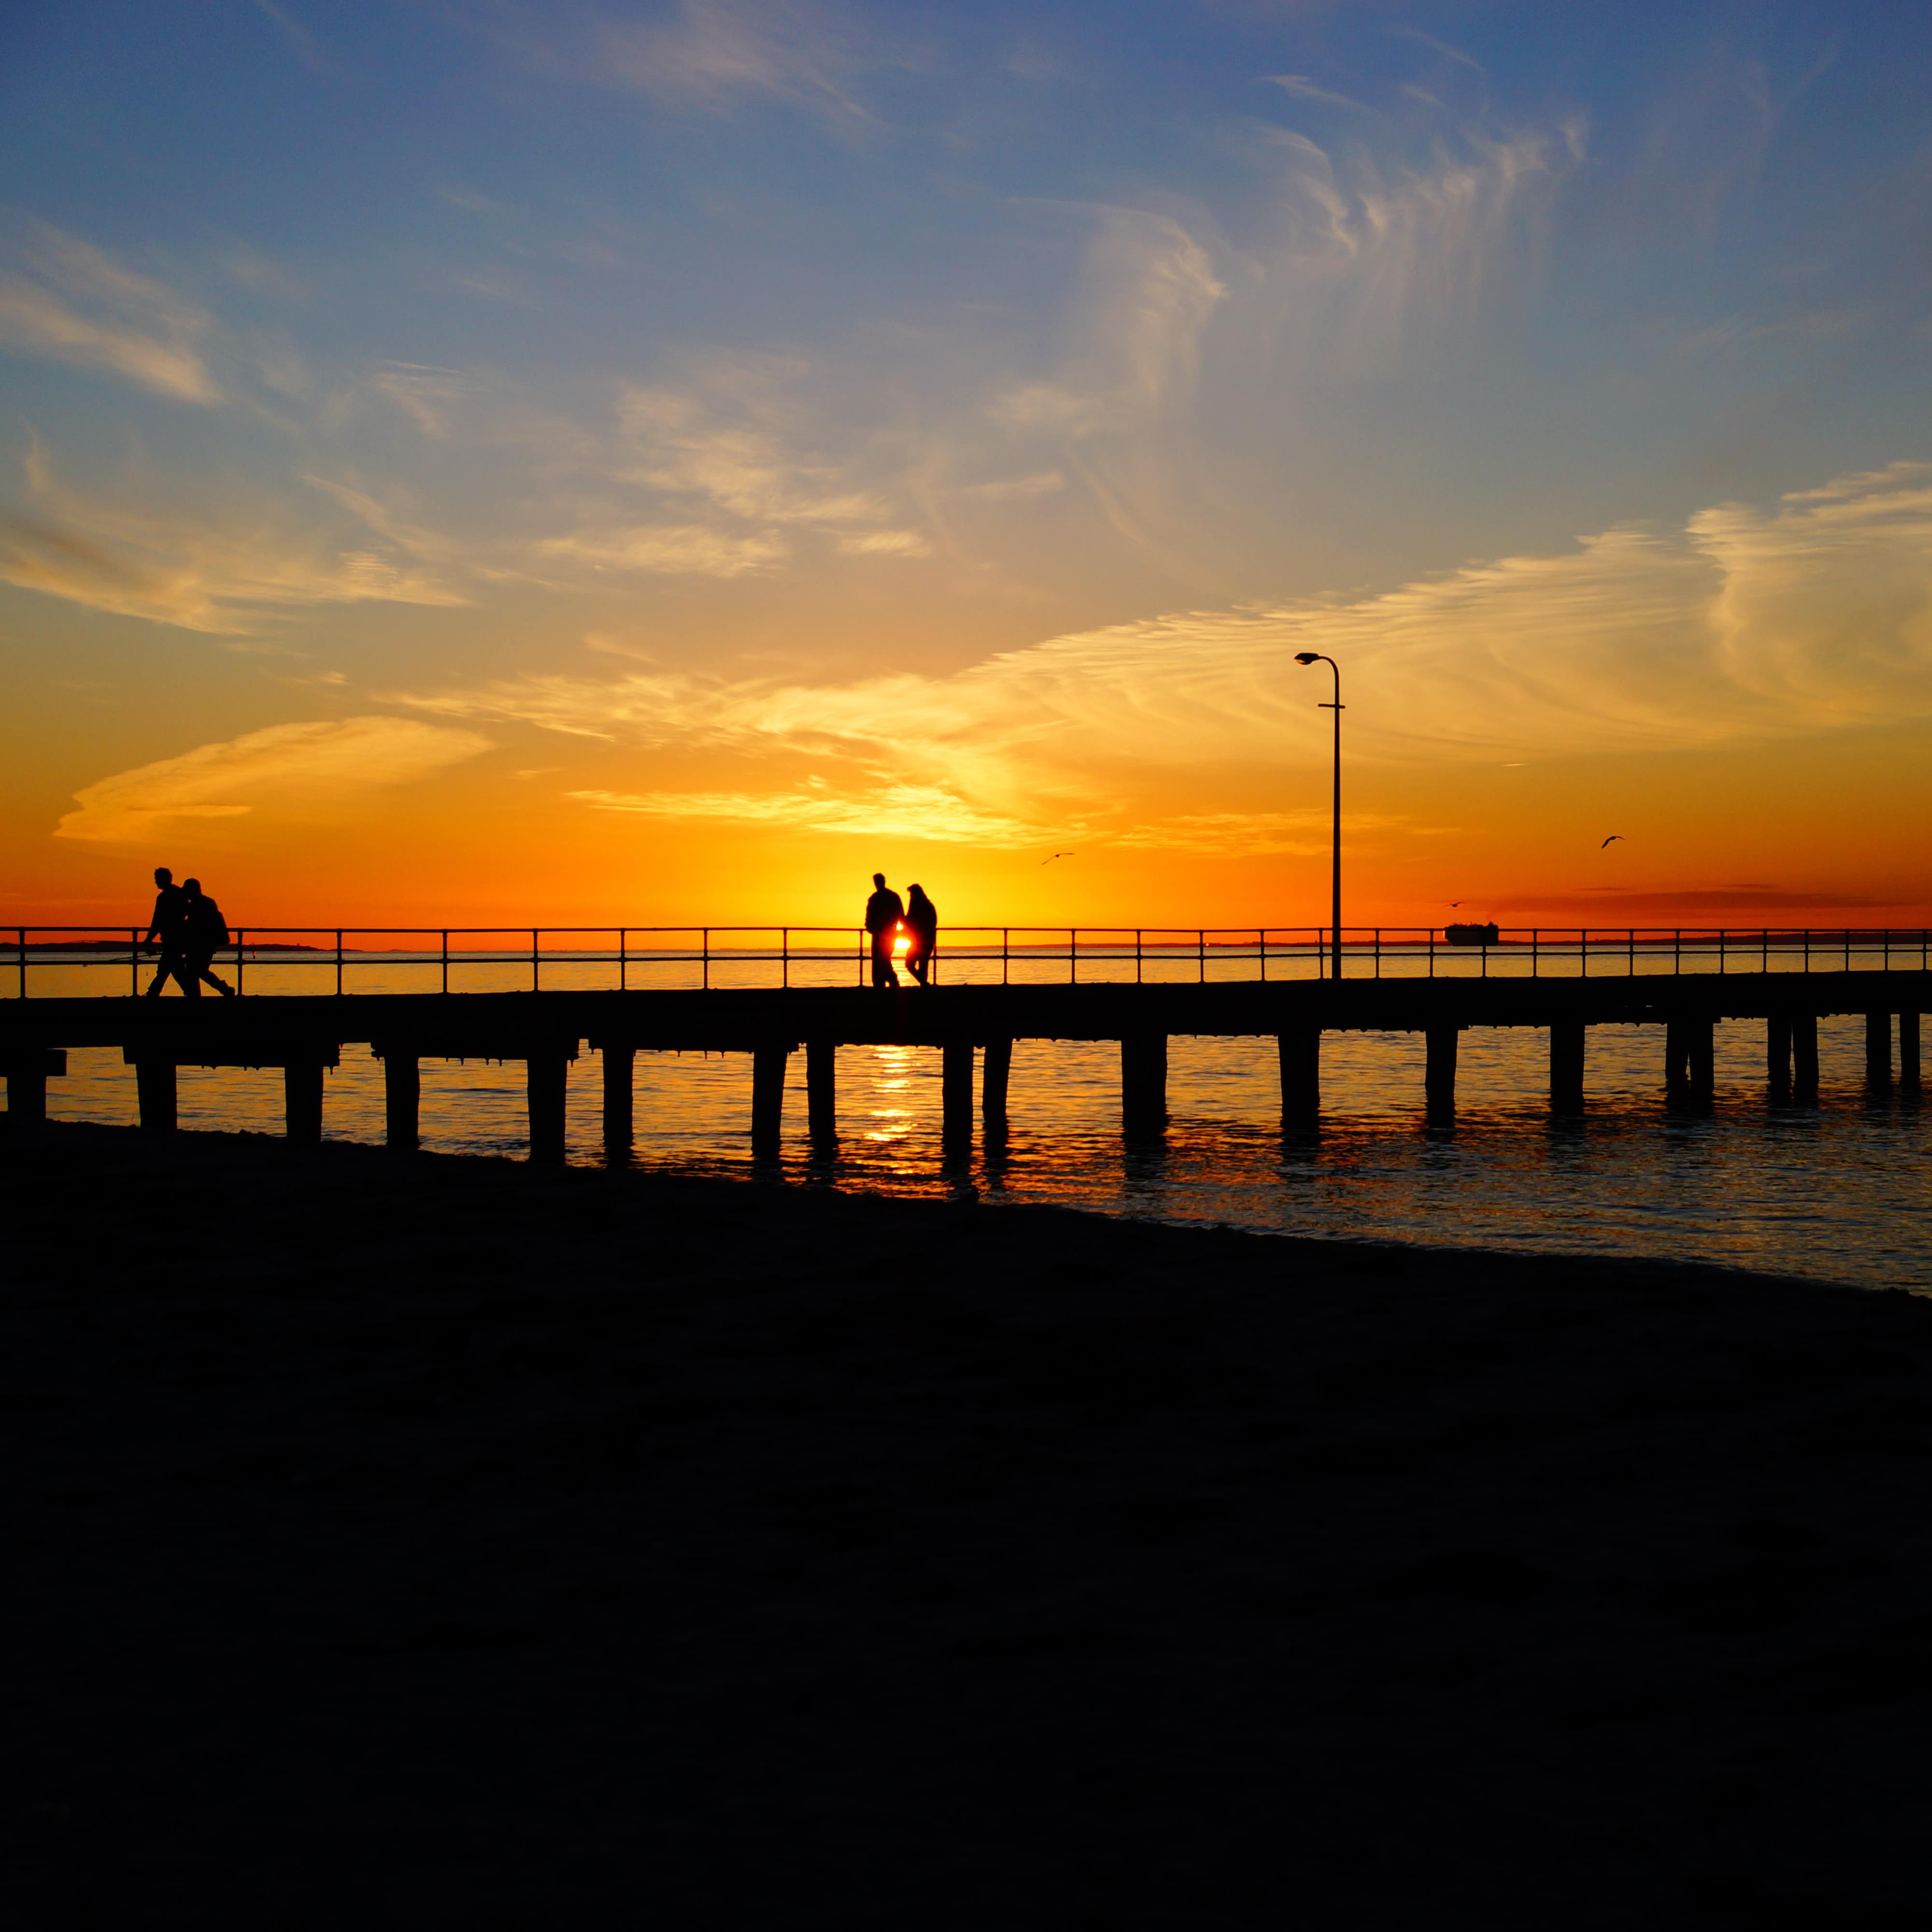 Golden sunset over an Australian beach and pier with shadows of couples walking